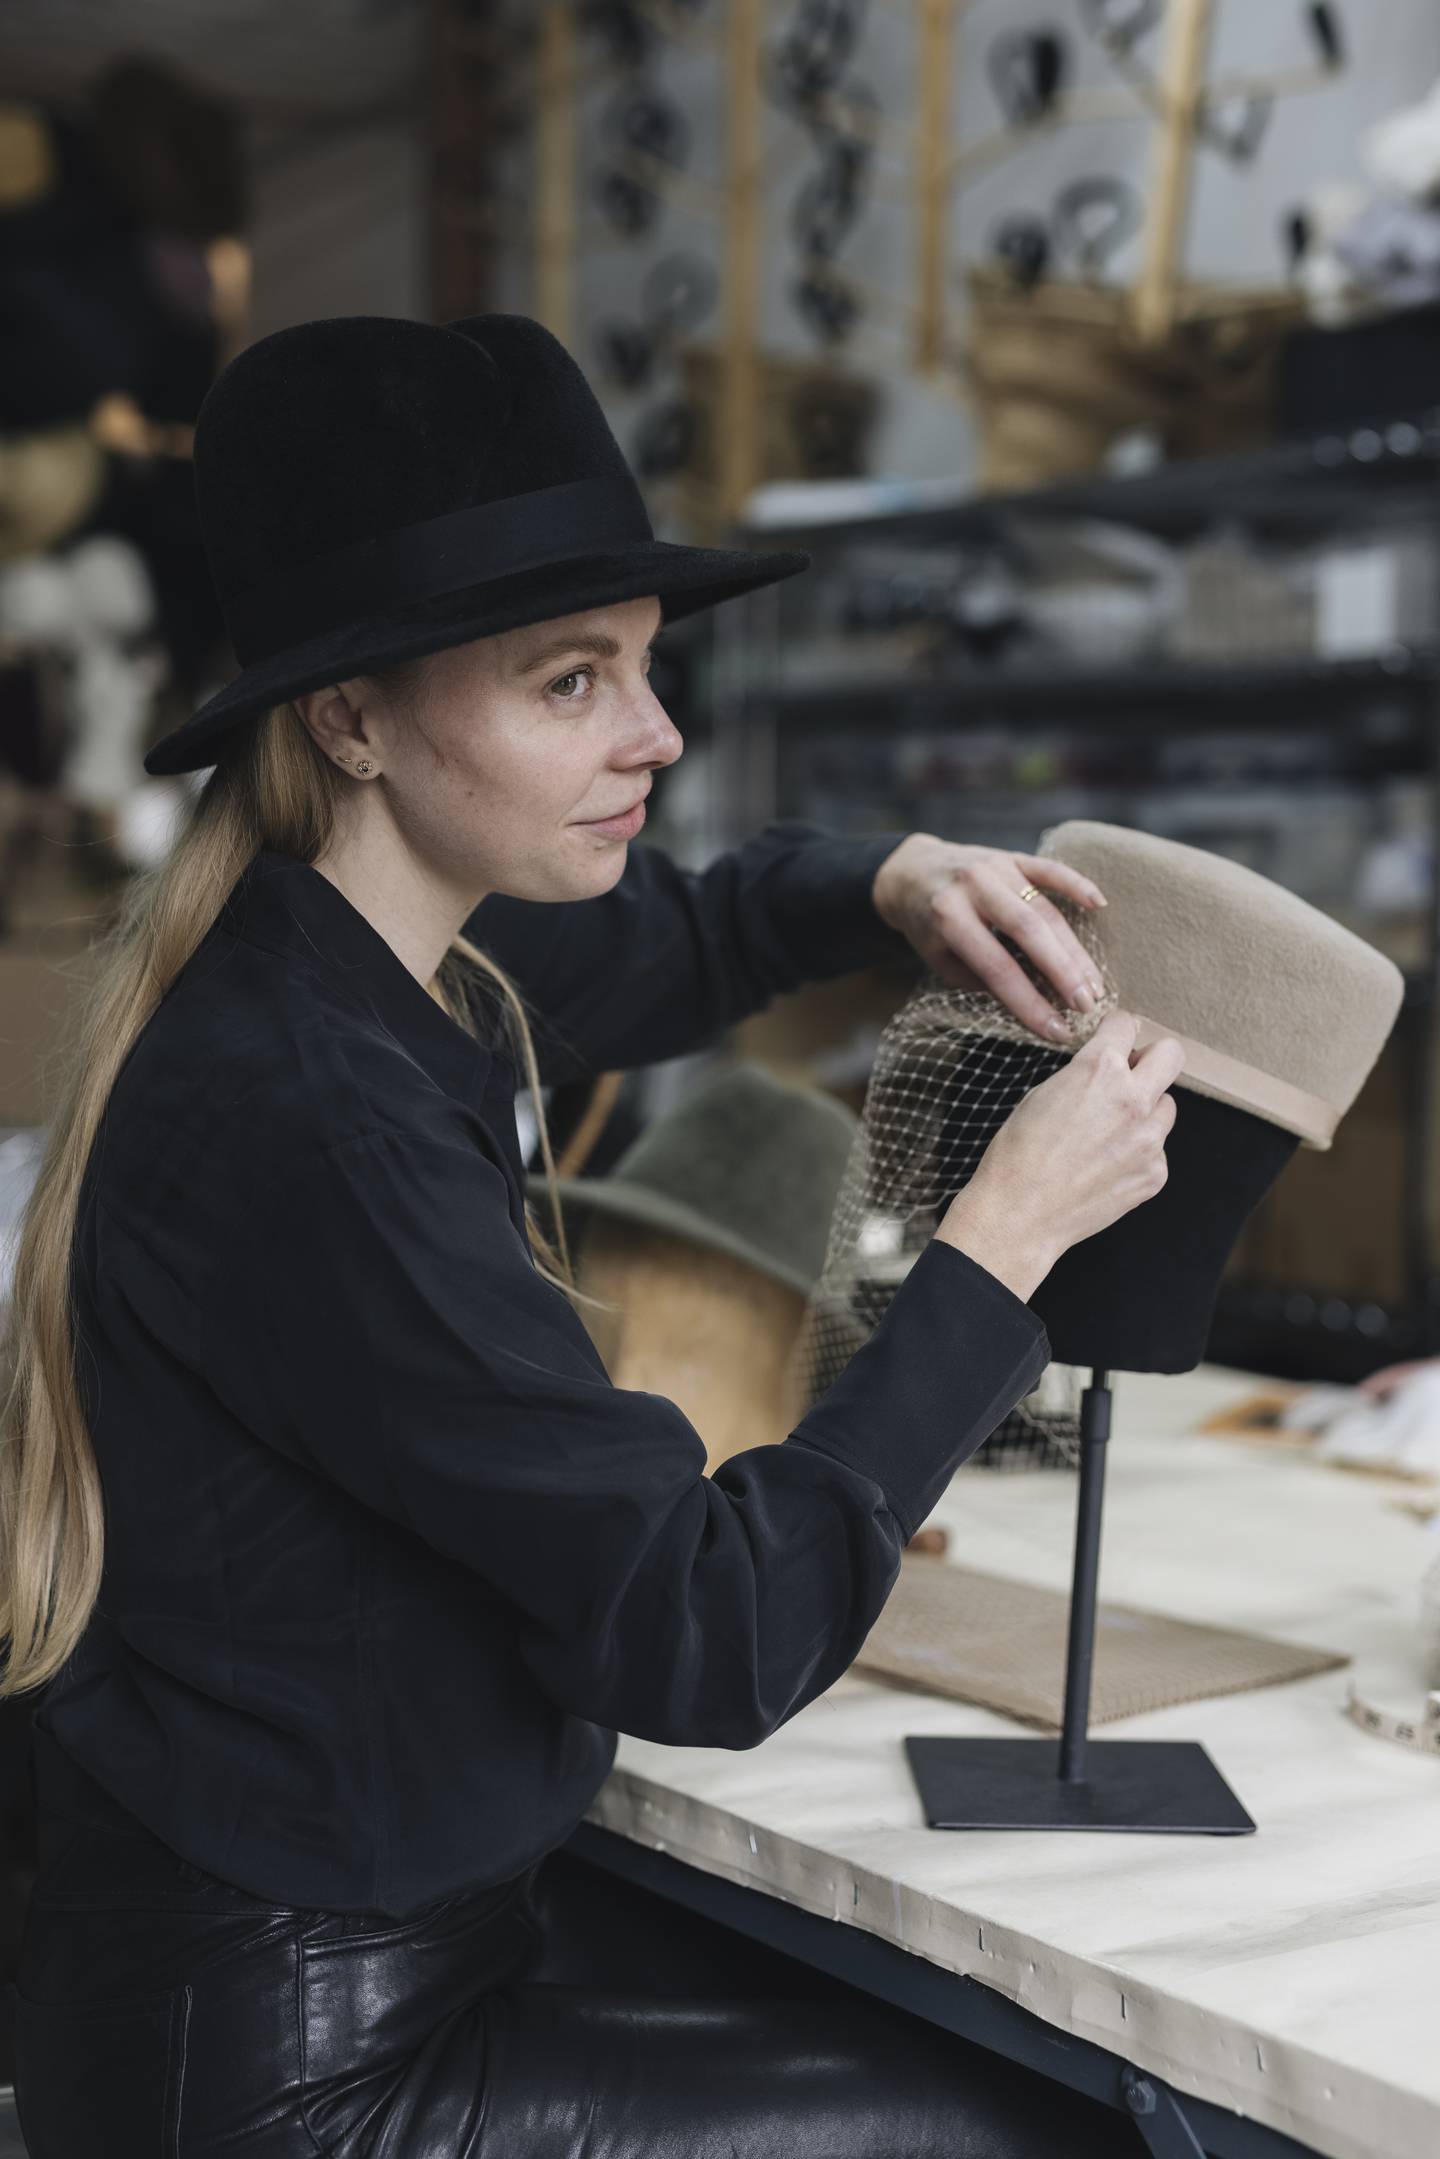 Accessories designer and milliner Gigi Burris O'Hara, who is launching Closely Crafted, making a hat.